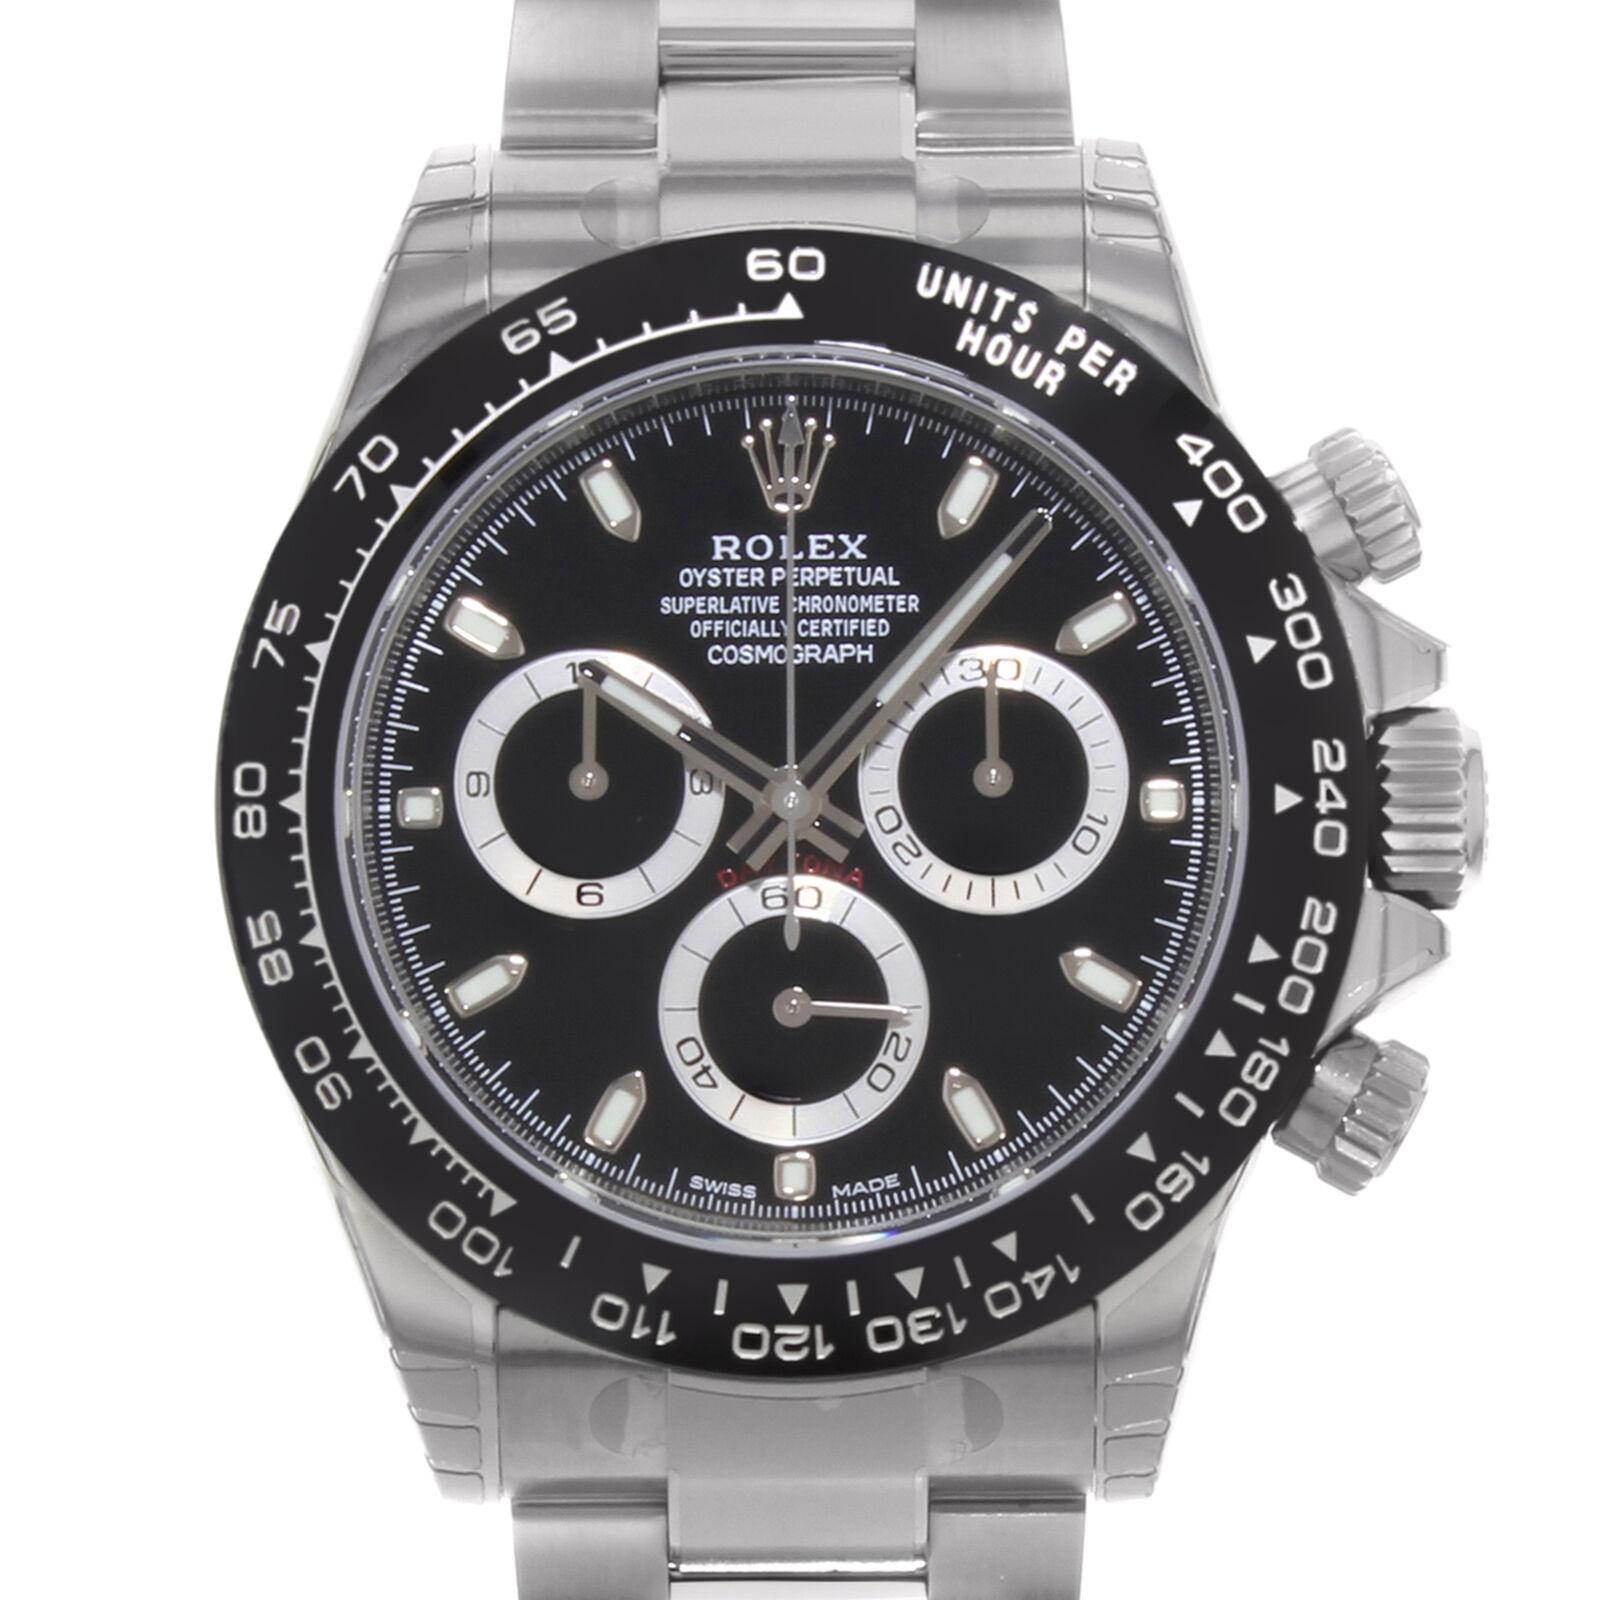 This brand new Rolex Daytona 116500LN bk is a beautiful men's timepiece that is powered by an automatic movement which is cased in a stainless steel case. It has a round shape face, chronograph, small seconds subdial, tachymeter dial and has hand